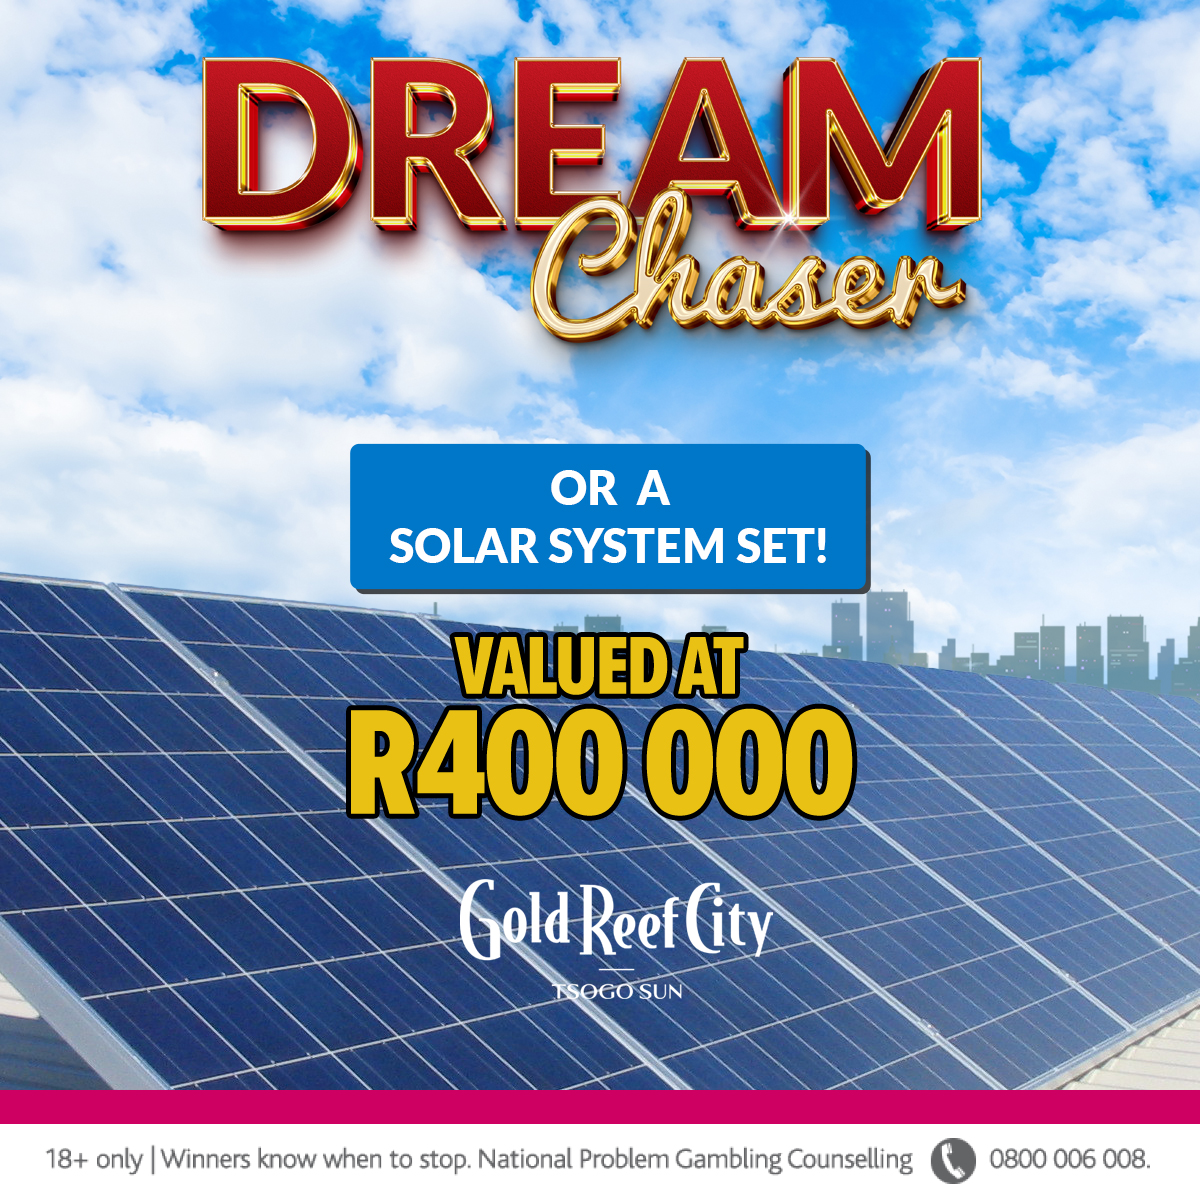 Unleash your luck every Saturday for your chance to win an array of prizes, including cash, vehicles, a Harley Davidson, and a home solar system valued at R400,000, exclusively at Gold Reef City! 🎉 Discover how you can be a winner at goldreefcity.co.za 🏆